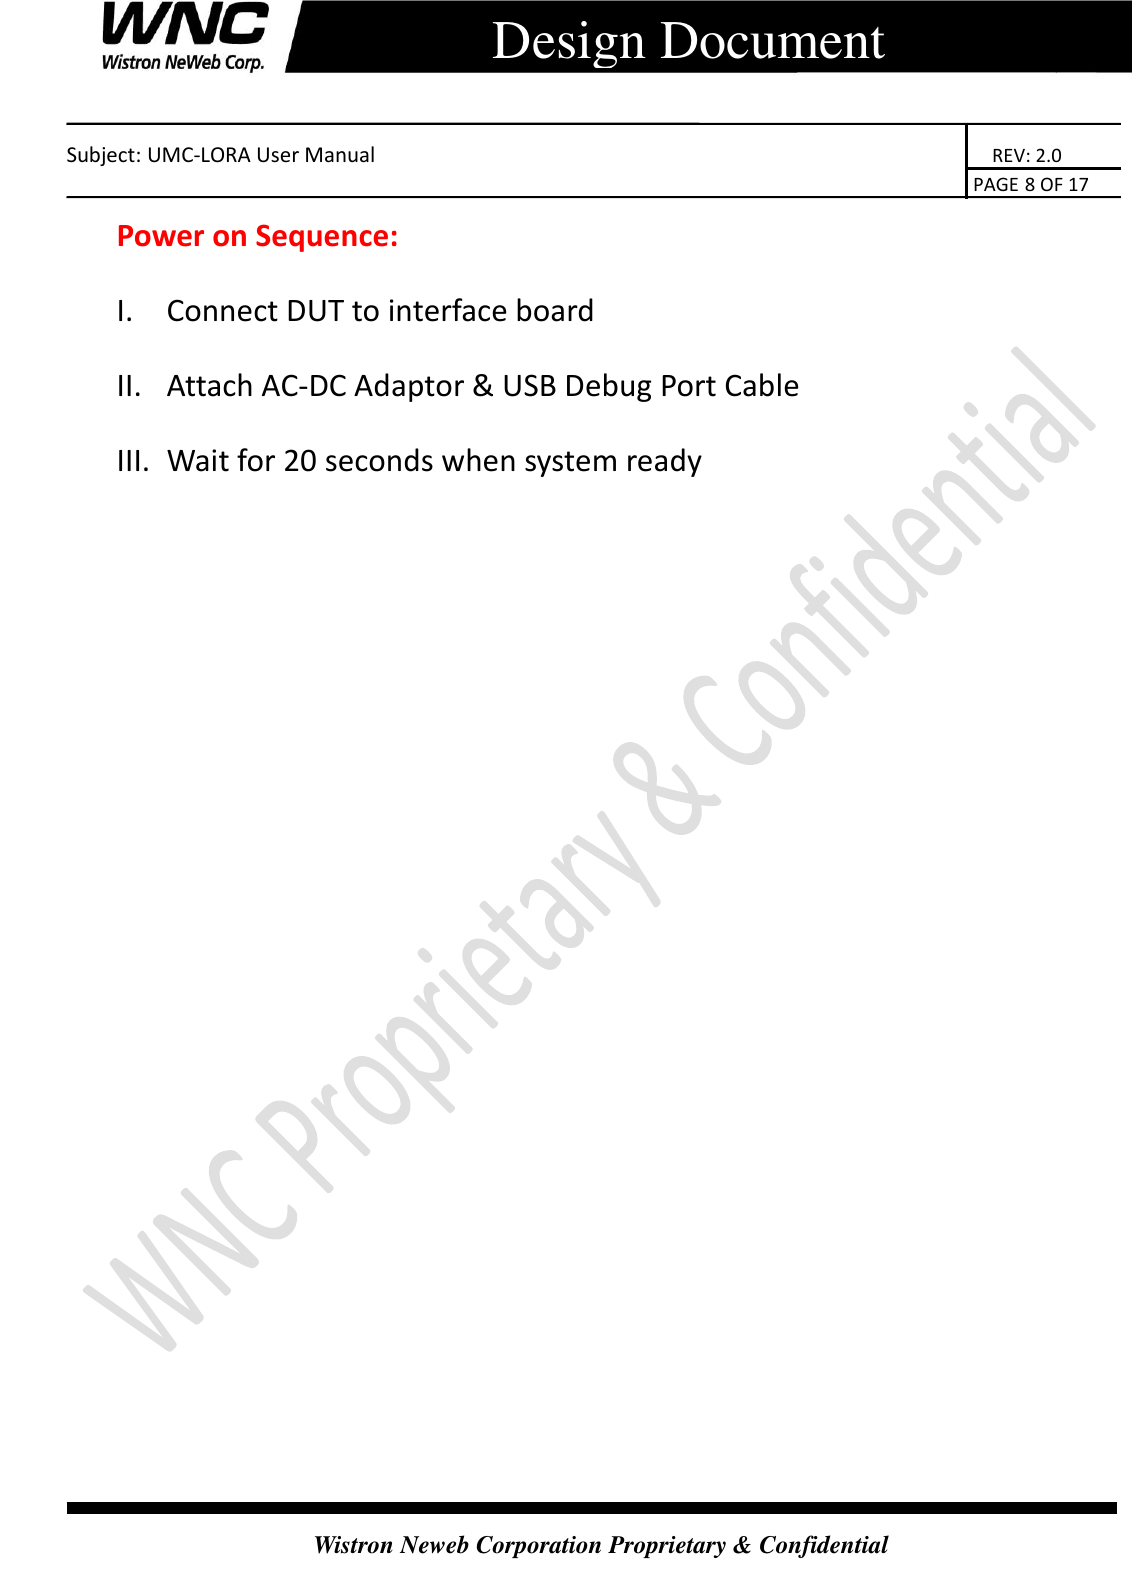    Subject: UMC-LORA User Manual                                                                      REV: 2.0                                                                                        PAGE 8 OF 17  Wistron Neweb Corporation Proprietary &amp; Confidential      Design Document Power on Sequence: I. Connect DUT to interface board II. Attach AC-DC Adaptor &amp; USB Debug Port Cable III. Wait for 20 seconds when system ready   